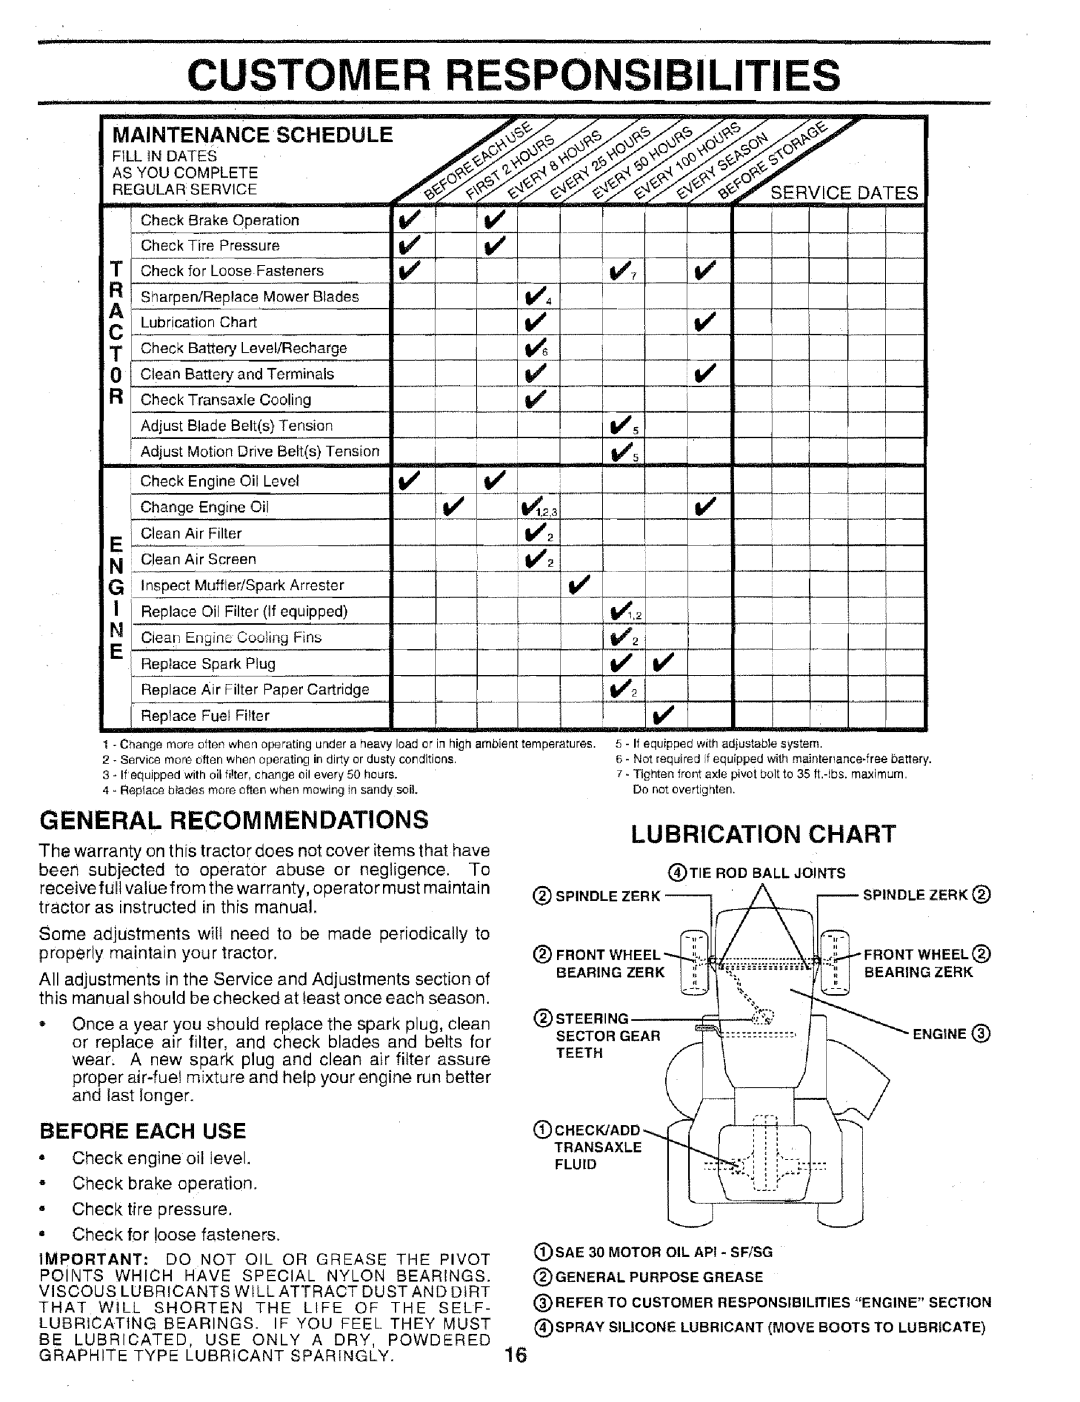 Sears 917.25051 Customer Responsibilities, F,Ll,Dates, V ,23, General Recommendations, Lubrication, Chart, Before Each Use 